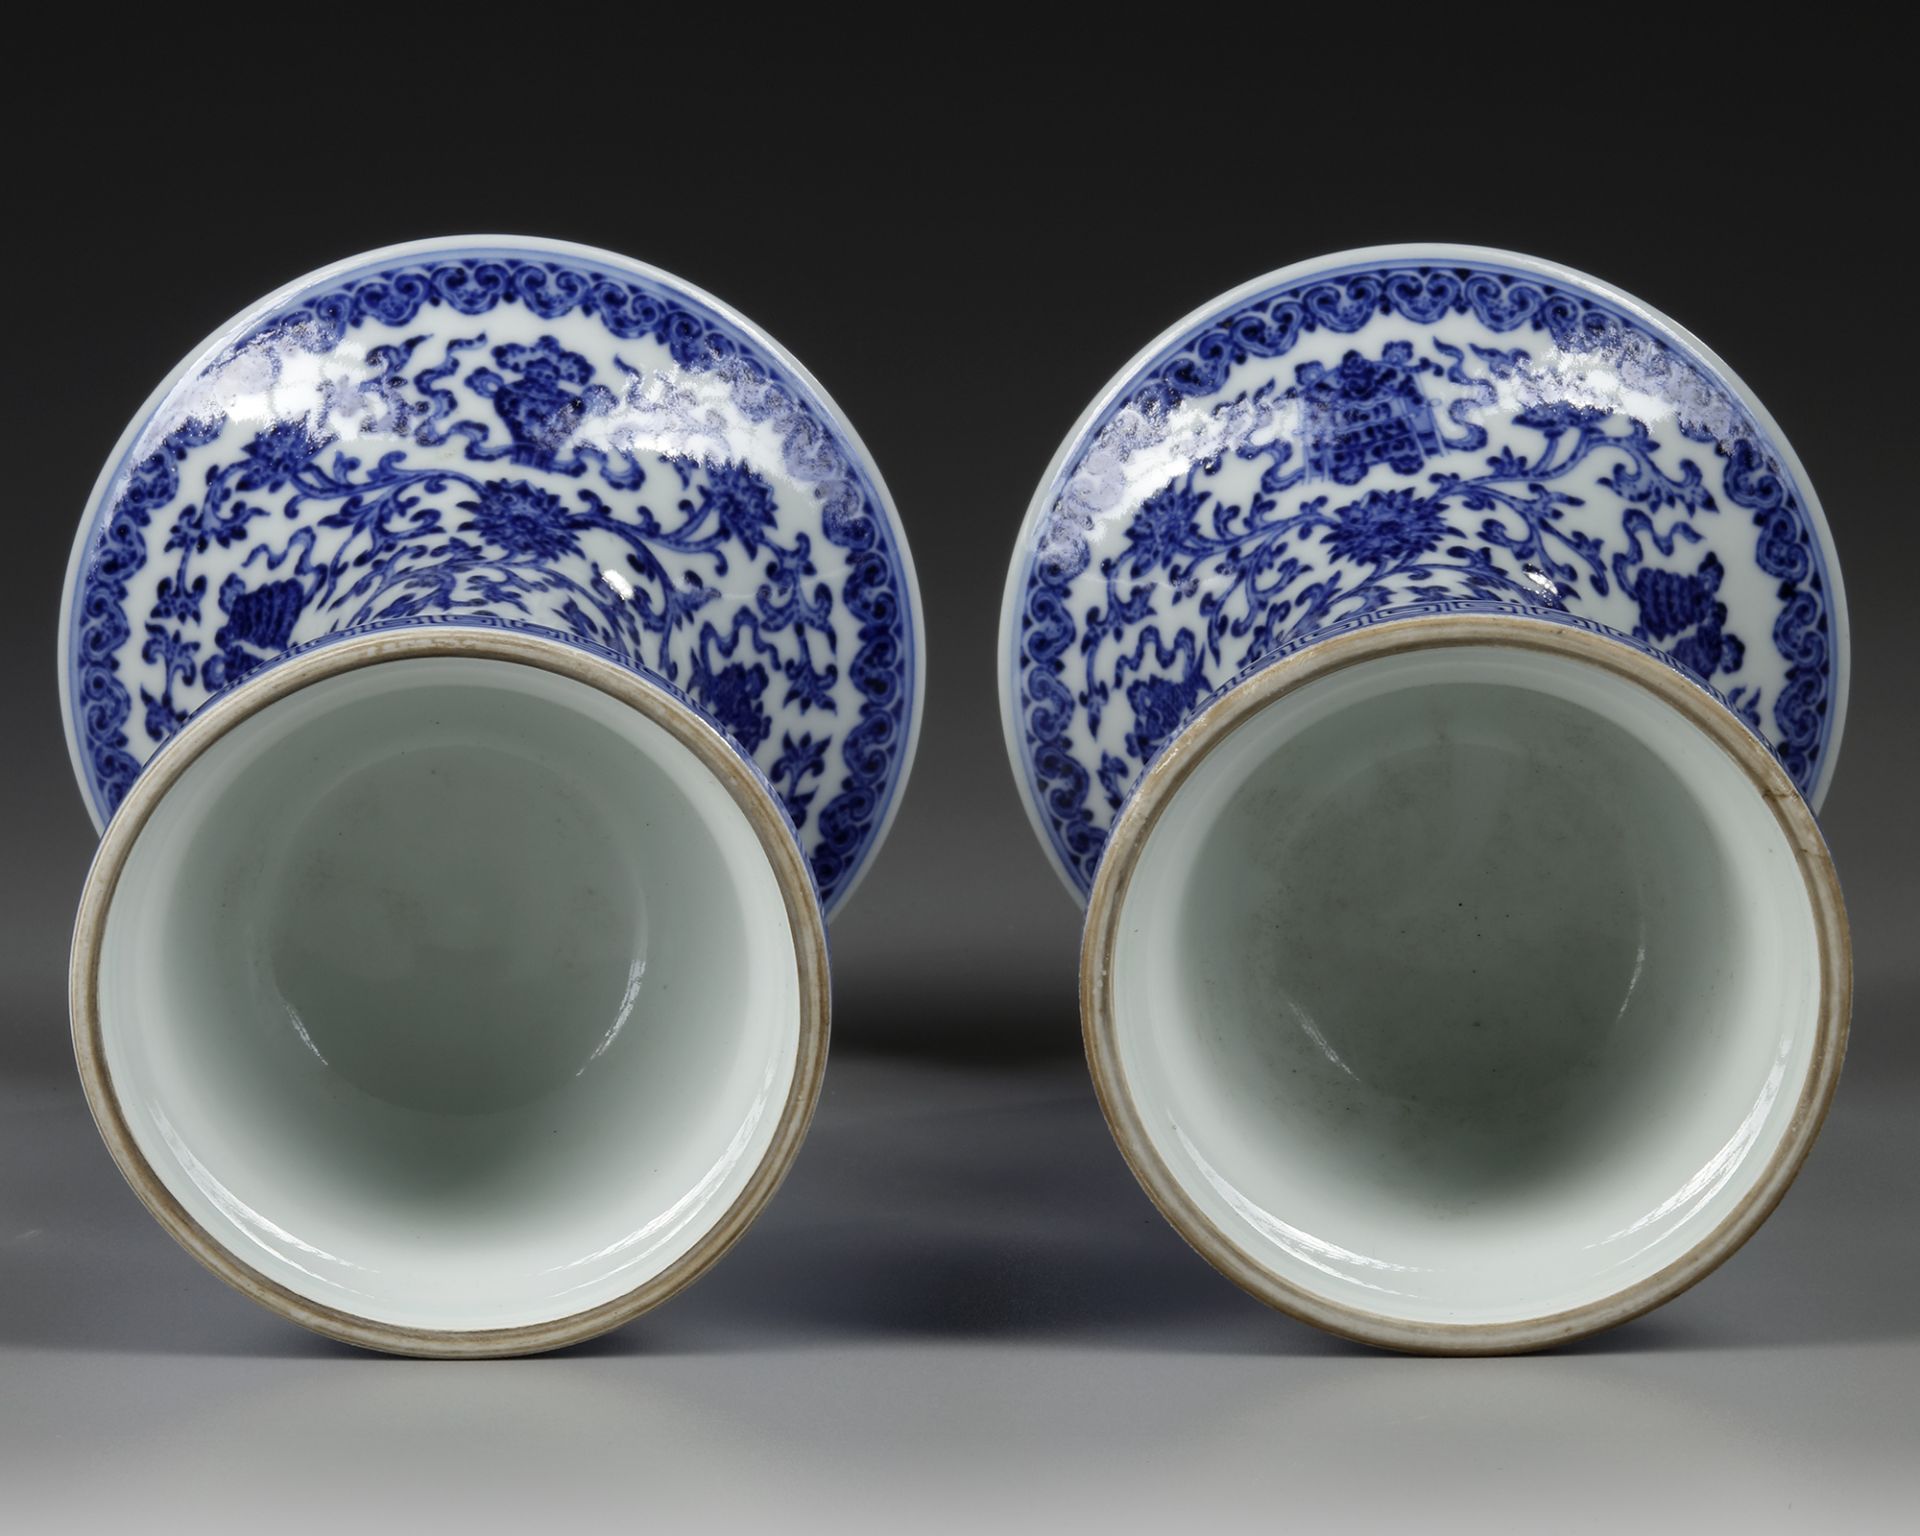 A PAIR OF CHINESE BLUE AND WHITE GU-FORM ALTAR VASES, QING DYNASTY (1644–1911) - Image 8 of 8